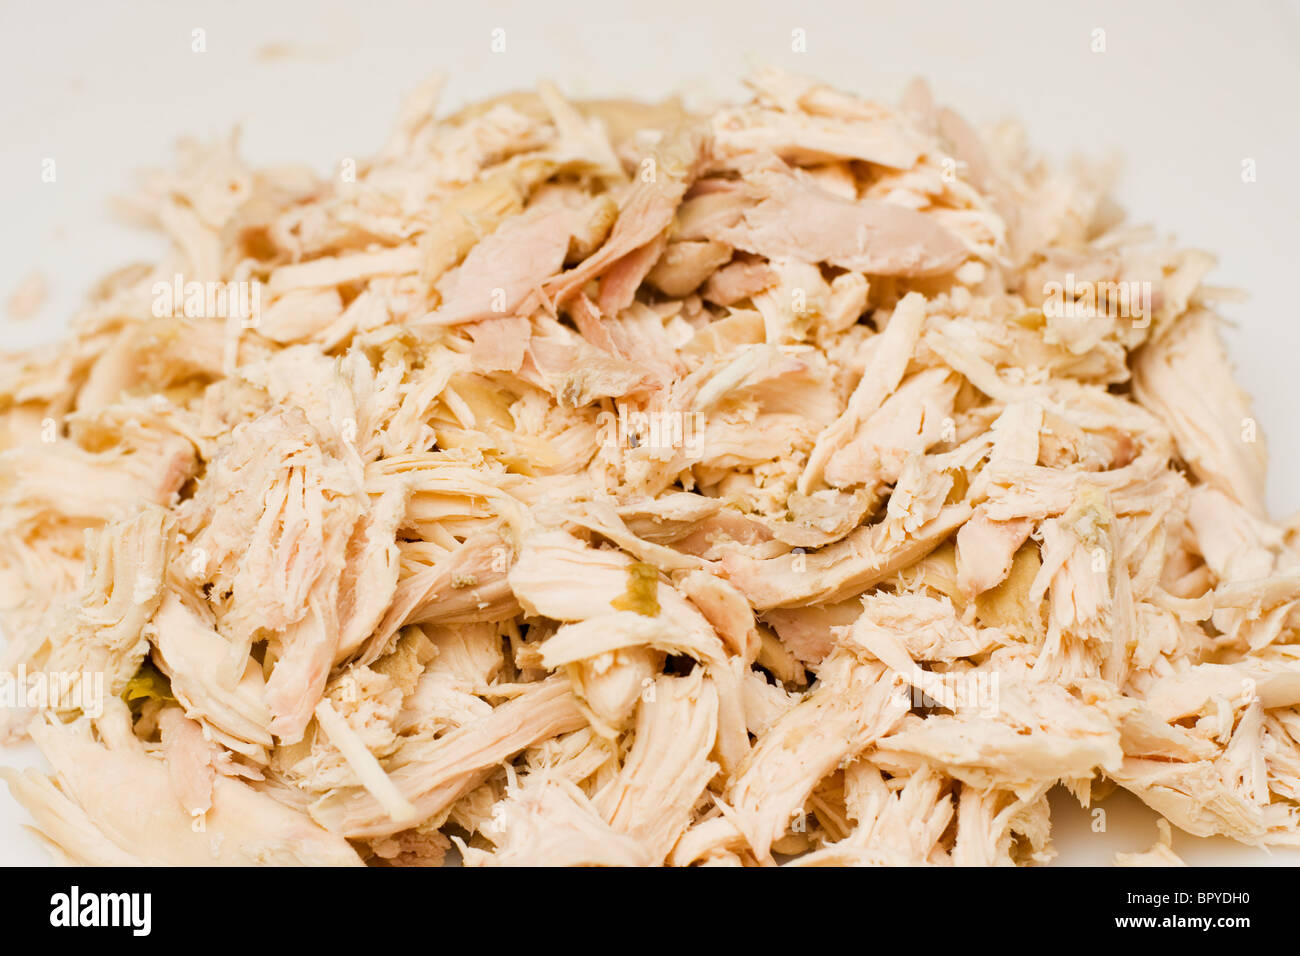 Shredded chicken meat. One of the steps in making homemade chicken soup or other healthy recipes. Stock Photo